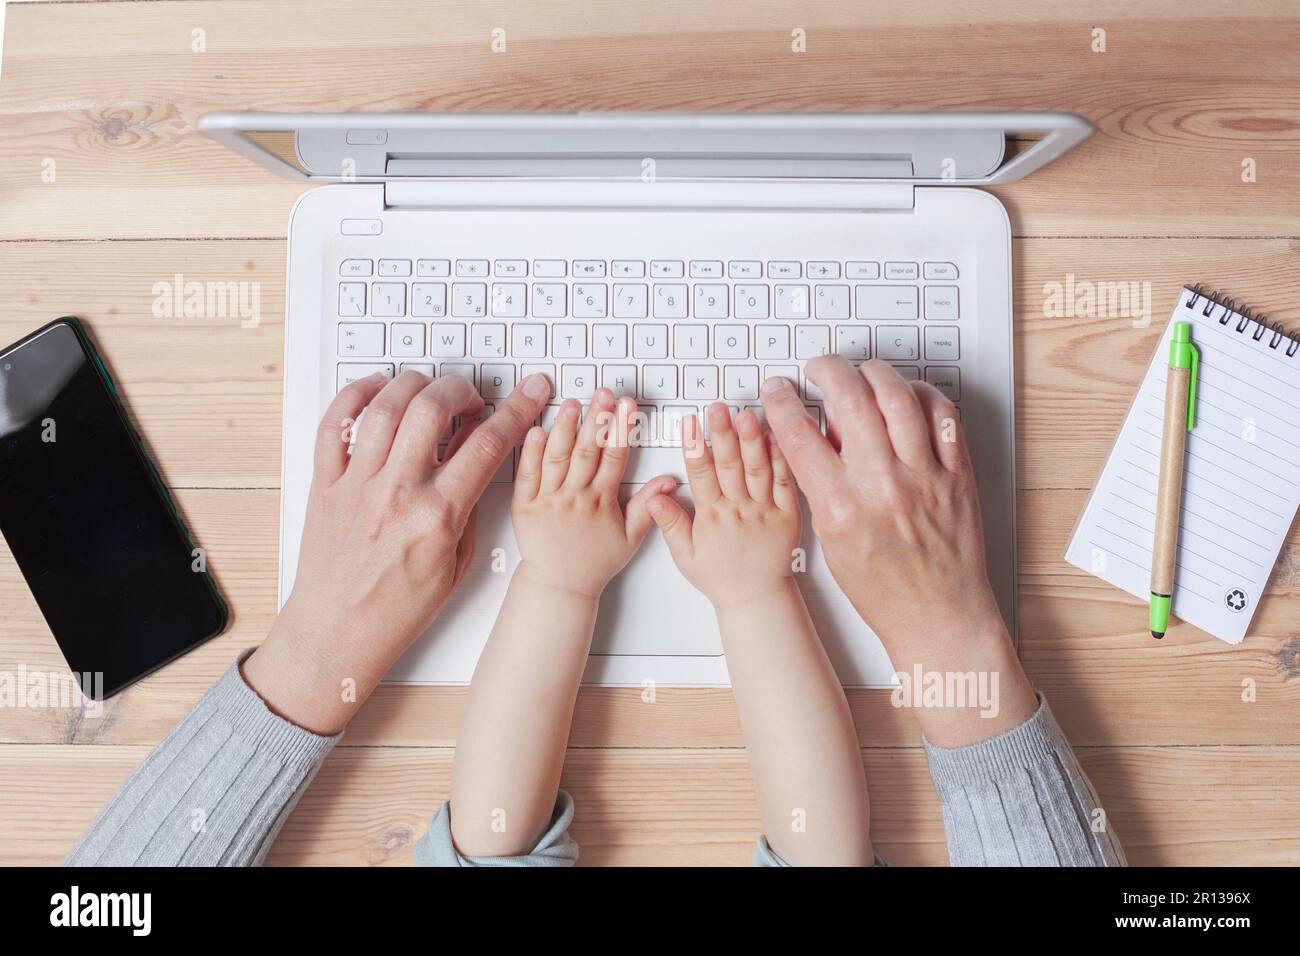 A mother and her one-year-old child's hands are visible on a laptop keyboard. Stock Photo